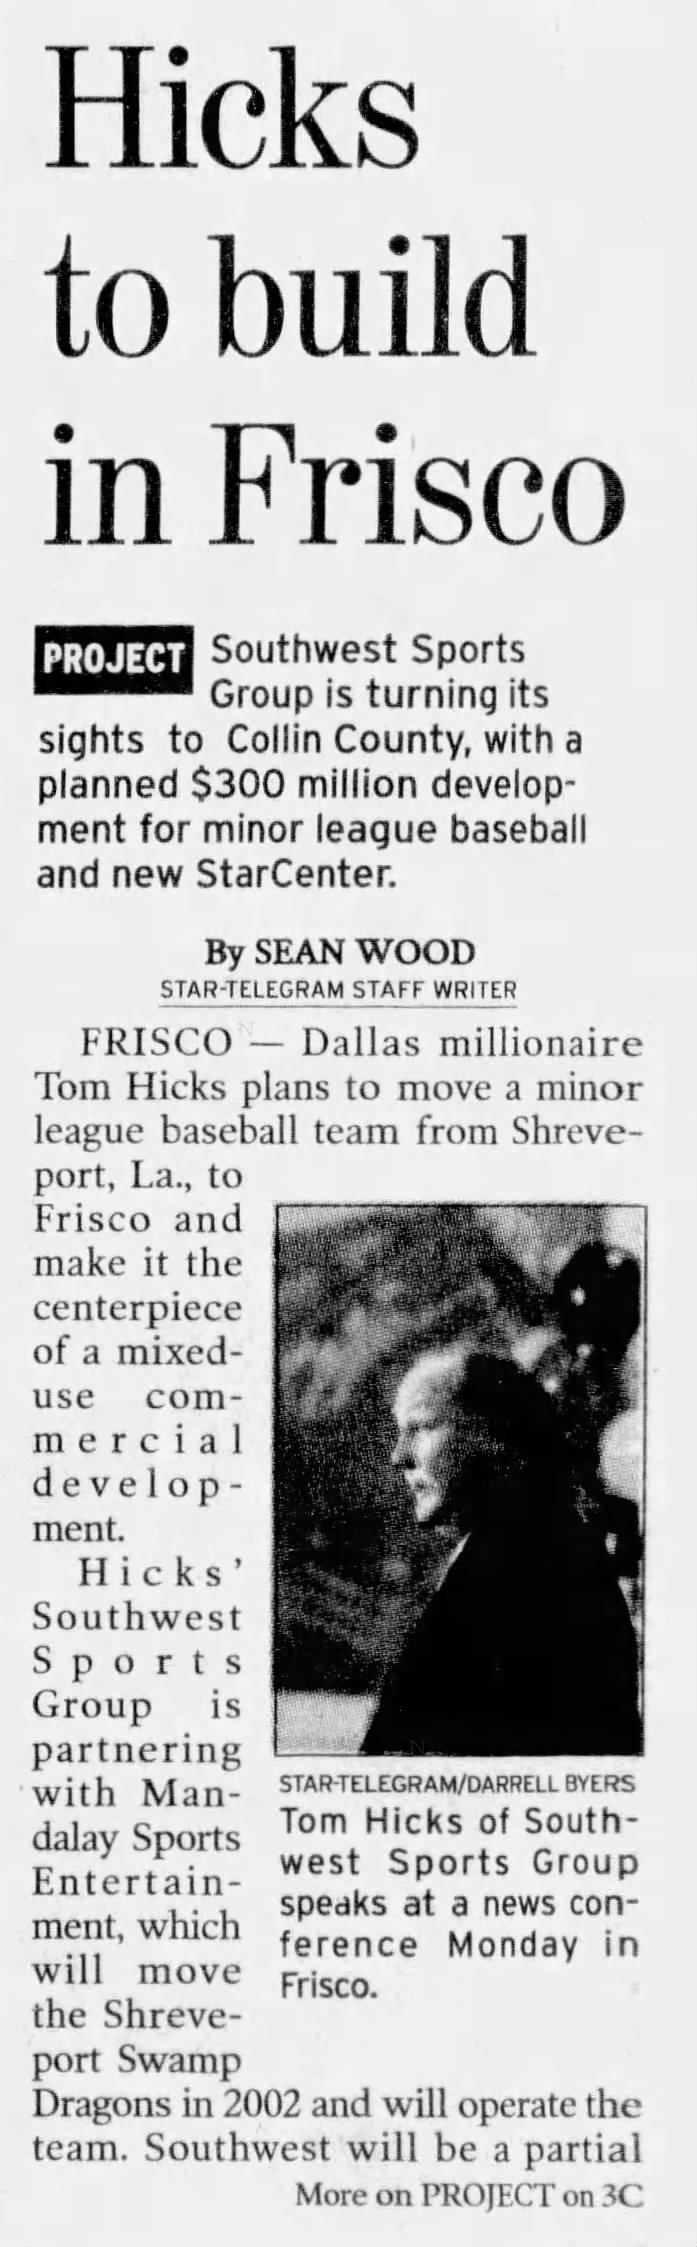 Hicks to Build in Frisco